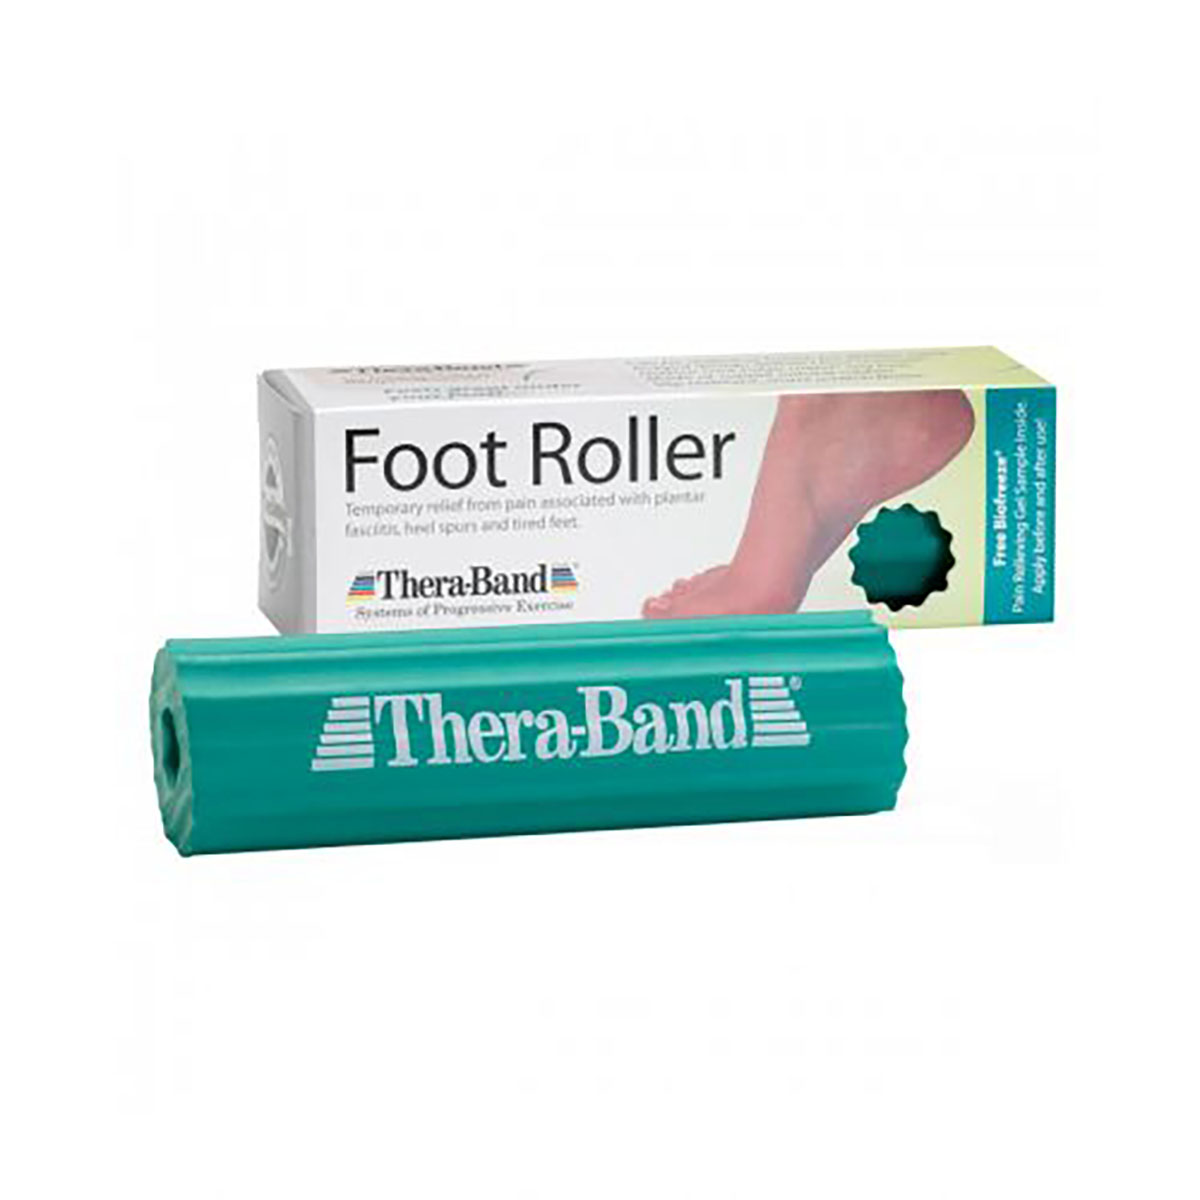 Picture of Theraband 30-1989 5 x 2 x 2 in. Foot Roller, Green